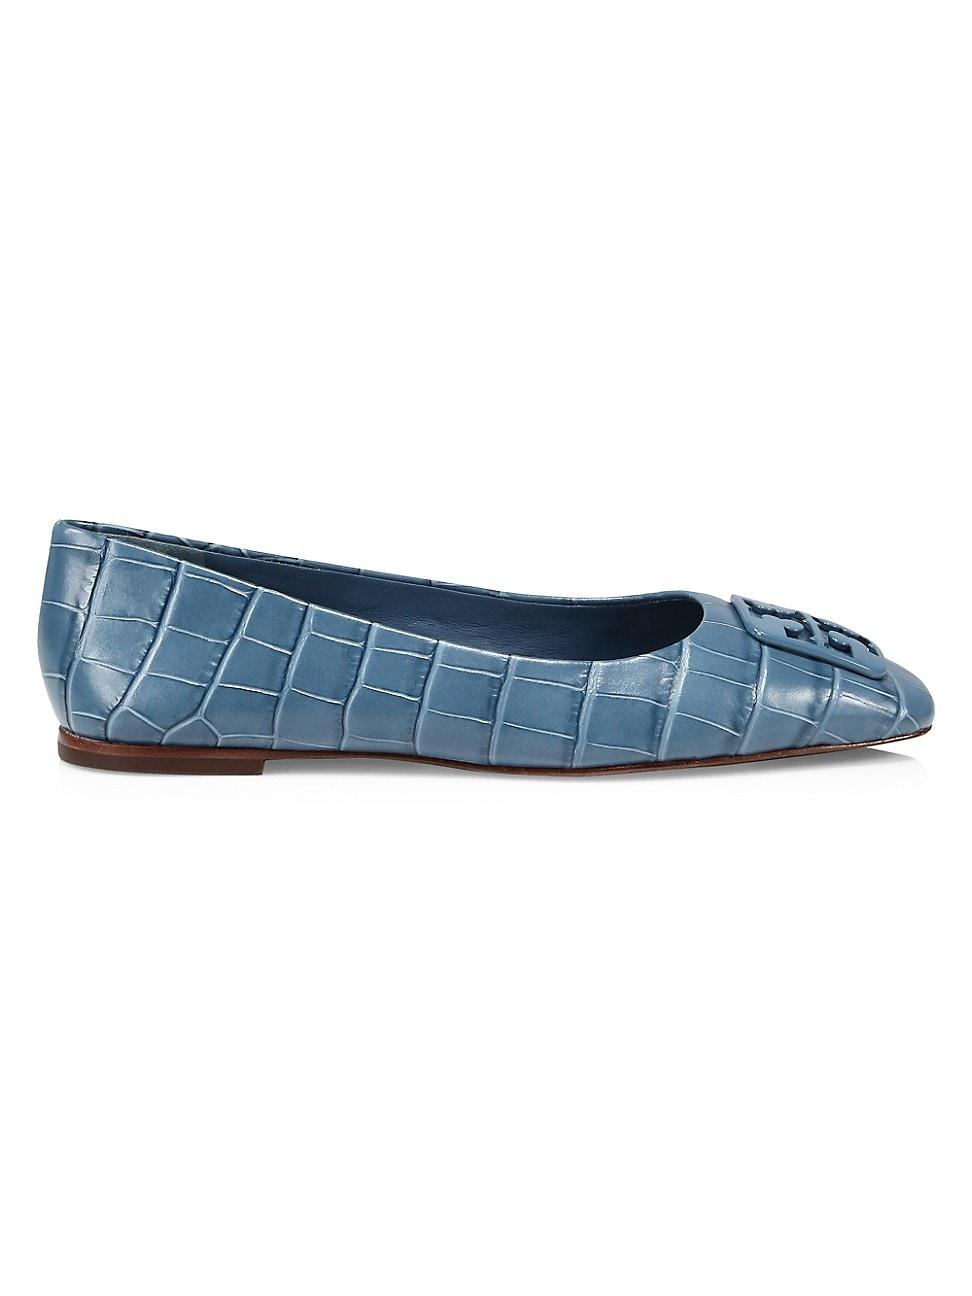 Tory Burch Georgia Square-toe Croc-embossed Leather Ballet Flats 